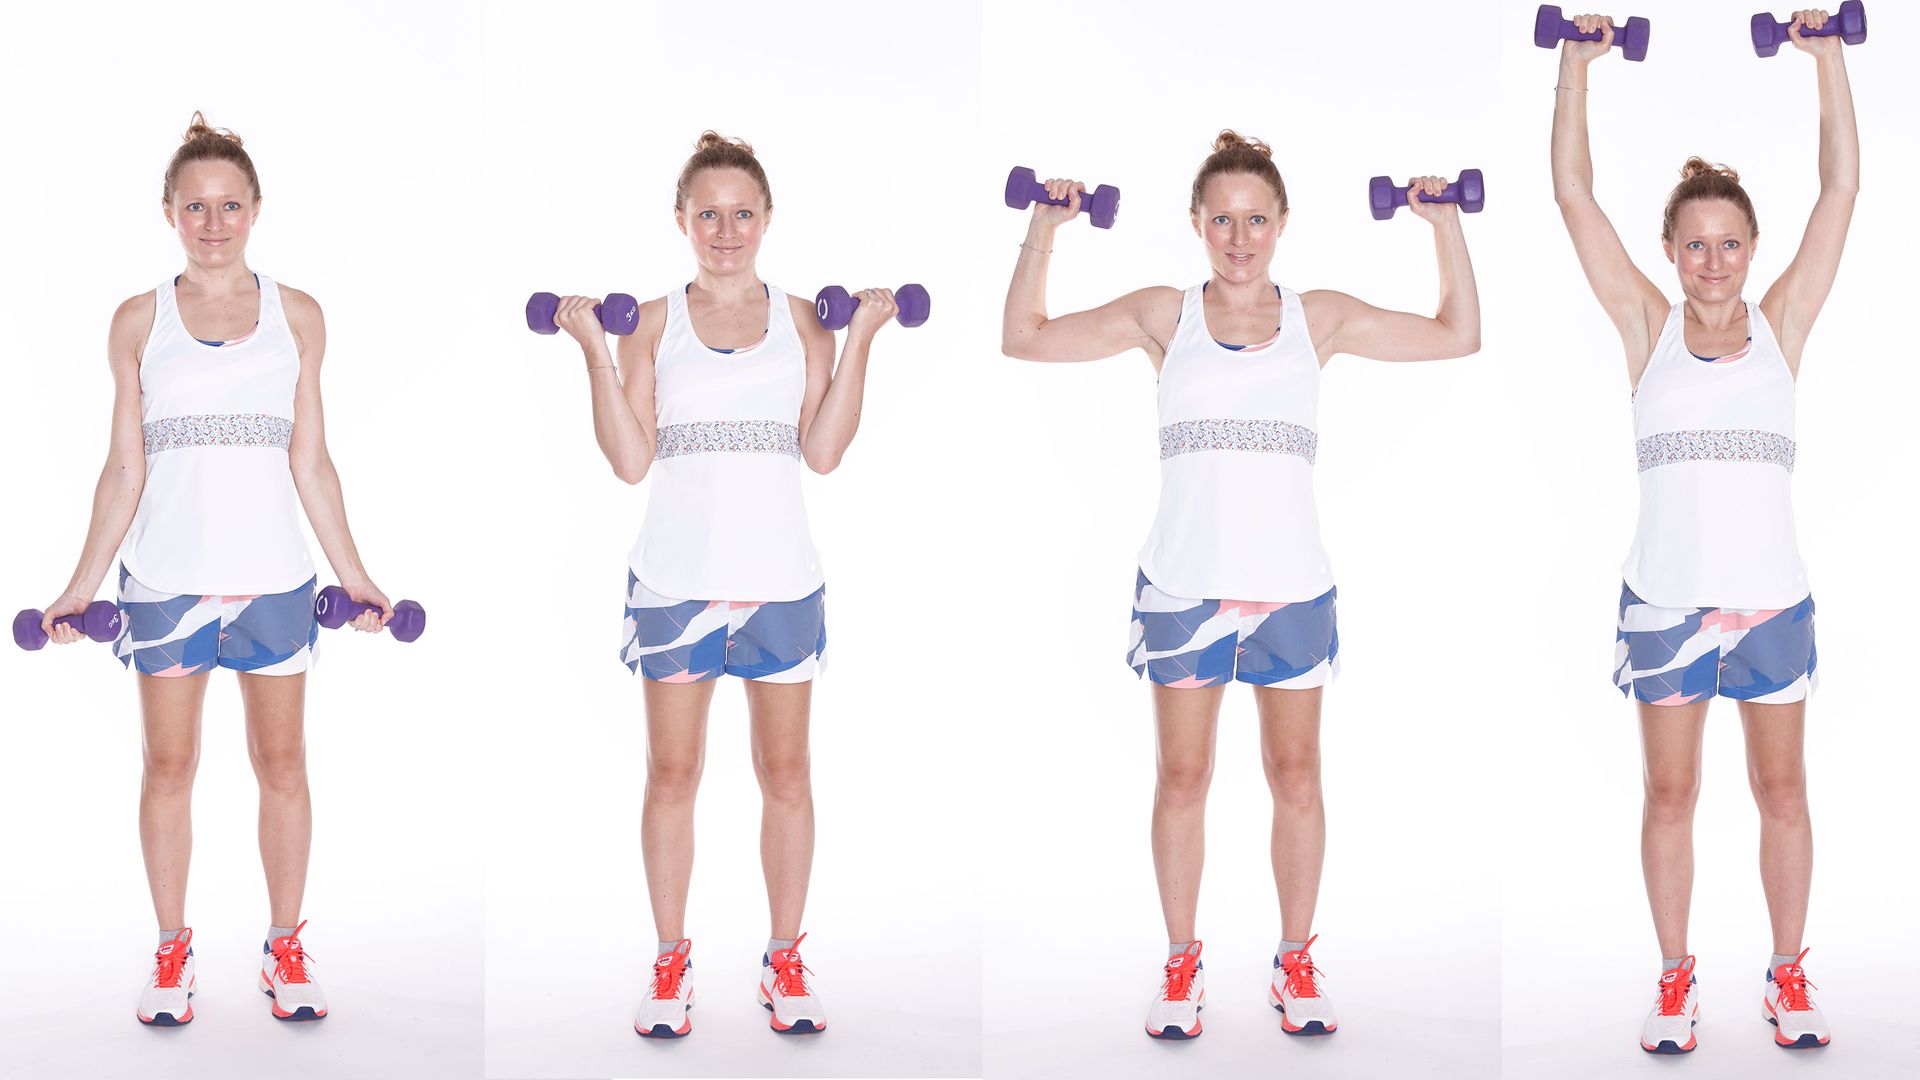 Full Body Dumbbell Workout Take Our 30 Day Challenge To Tone Your Entire Body Fitandwell 5649